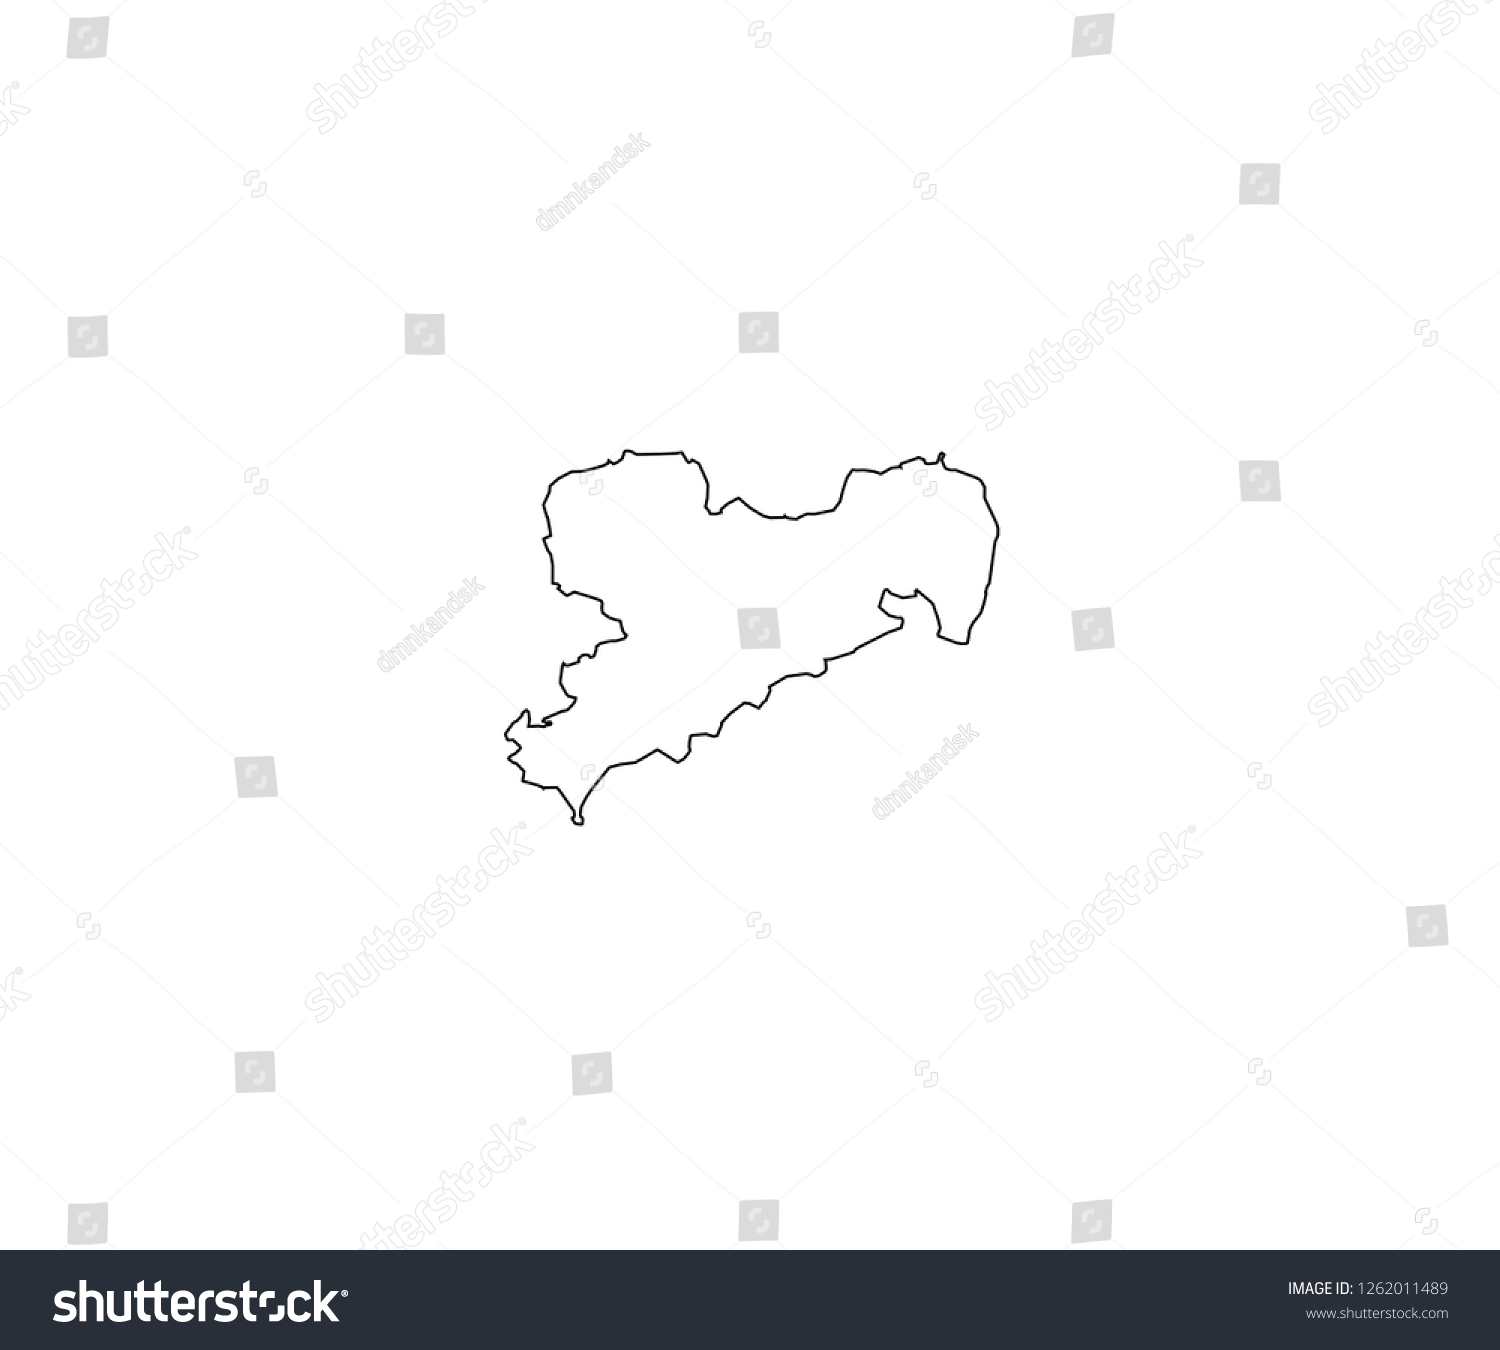 Saxony Map Outline Germany State Stock Vector (Royalty Free) 1262011489 ...